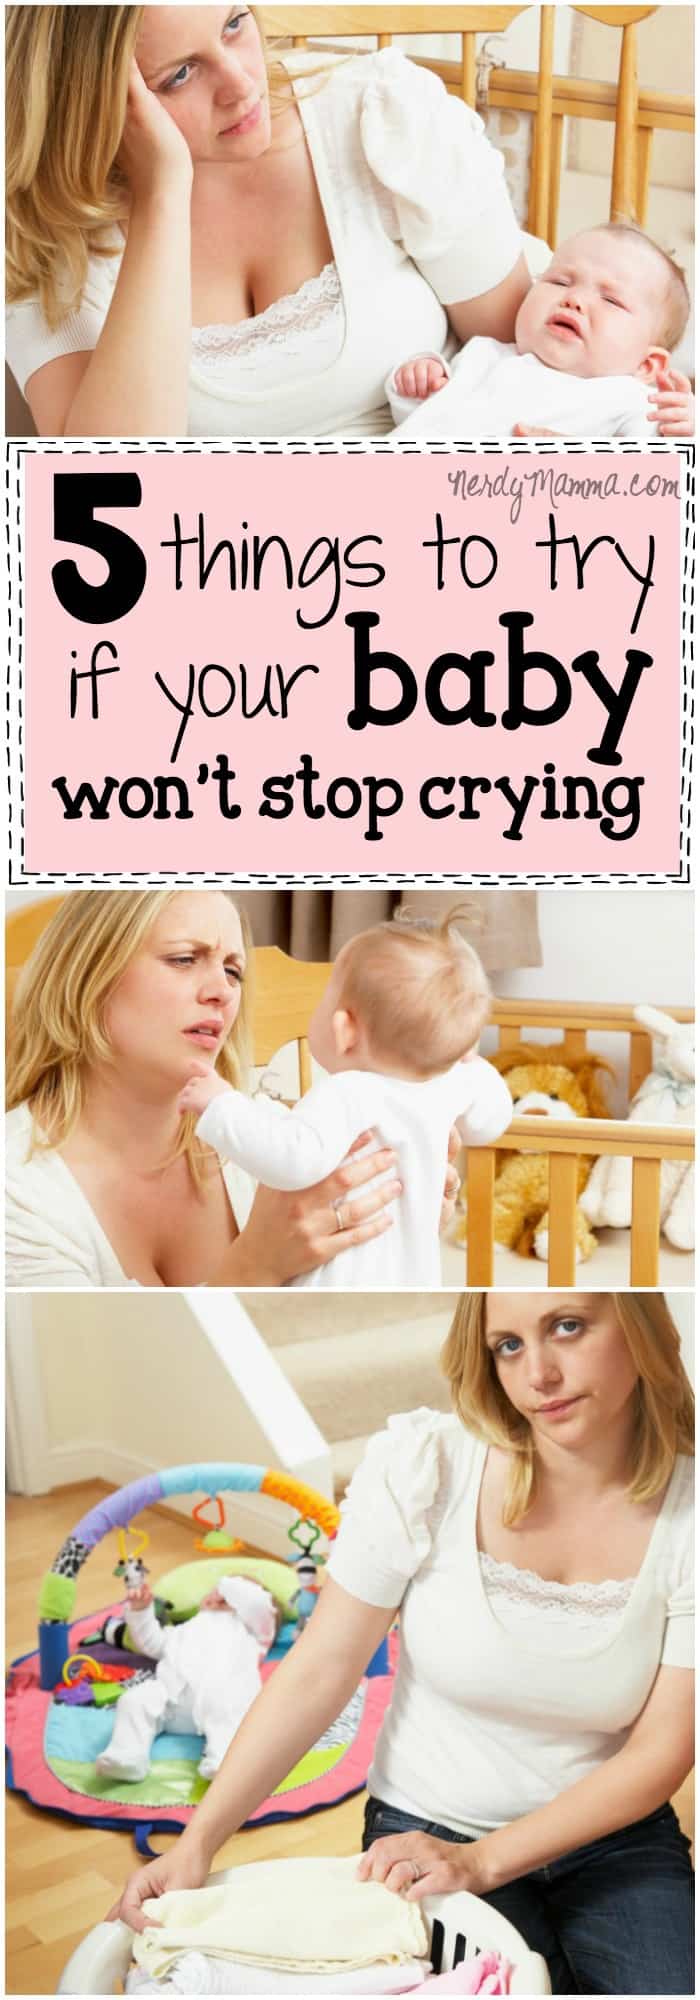 Man, I wish I'd known these 5 things to try if your baby won't stop crying YEARS ago...would have saved me so much heartache.